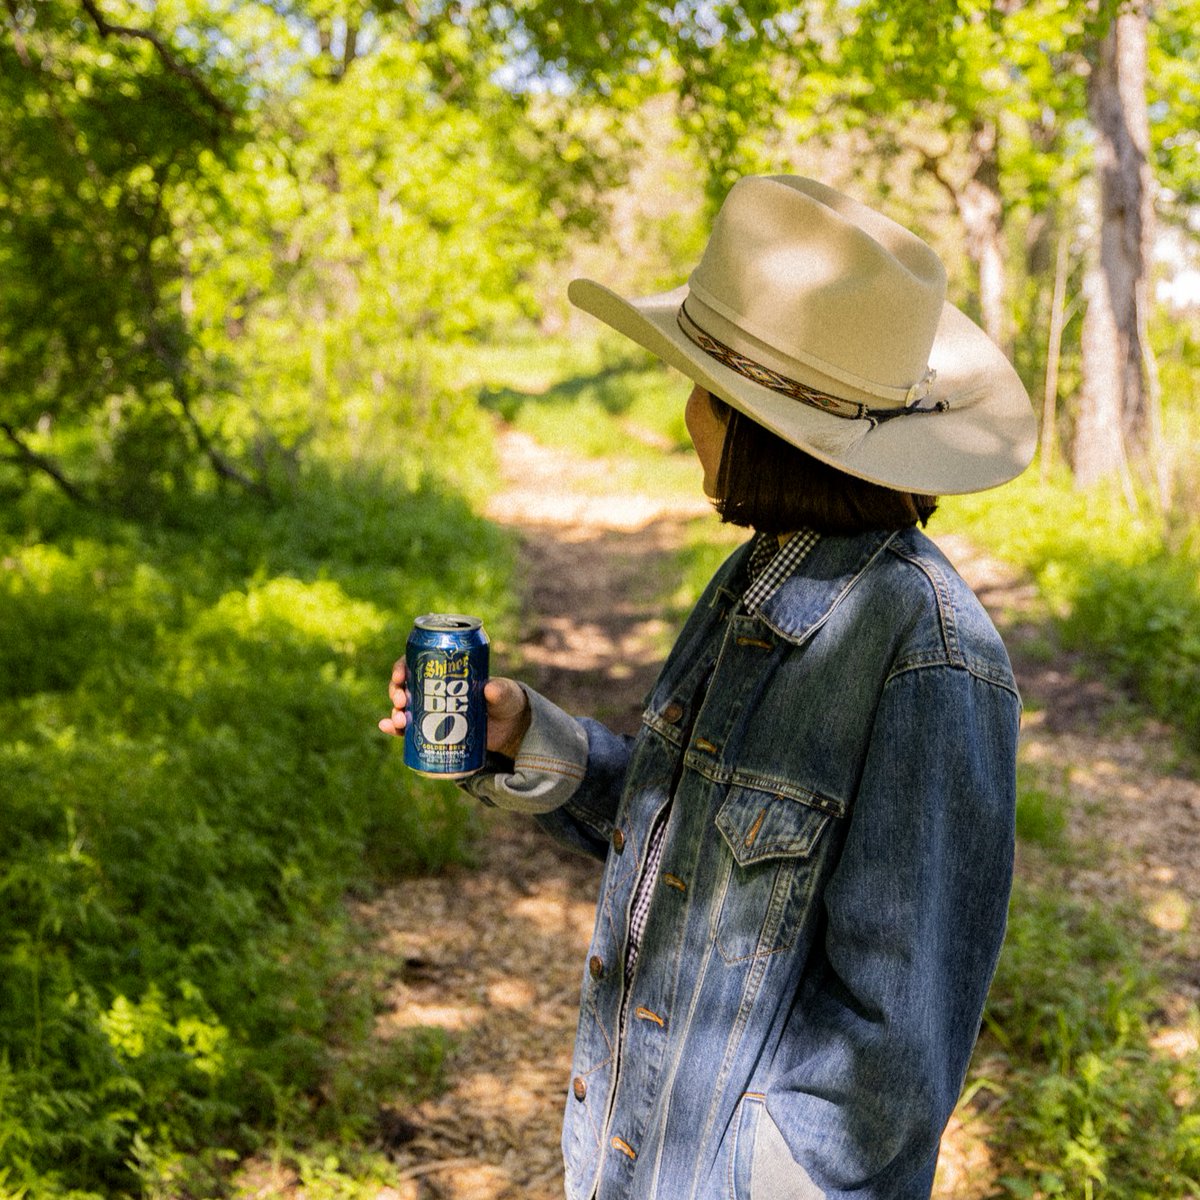 Every Texan deserves some R&R (Ranchin' and Rode0) 🍺 Spend more time on the range with our delicious non-alc lager